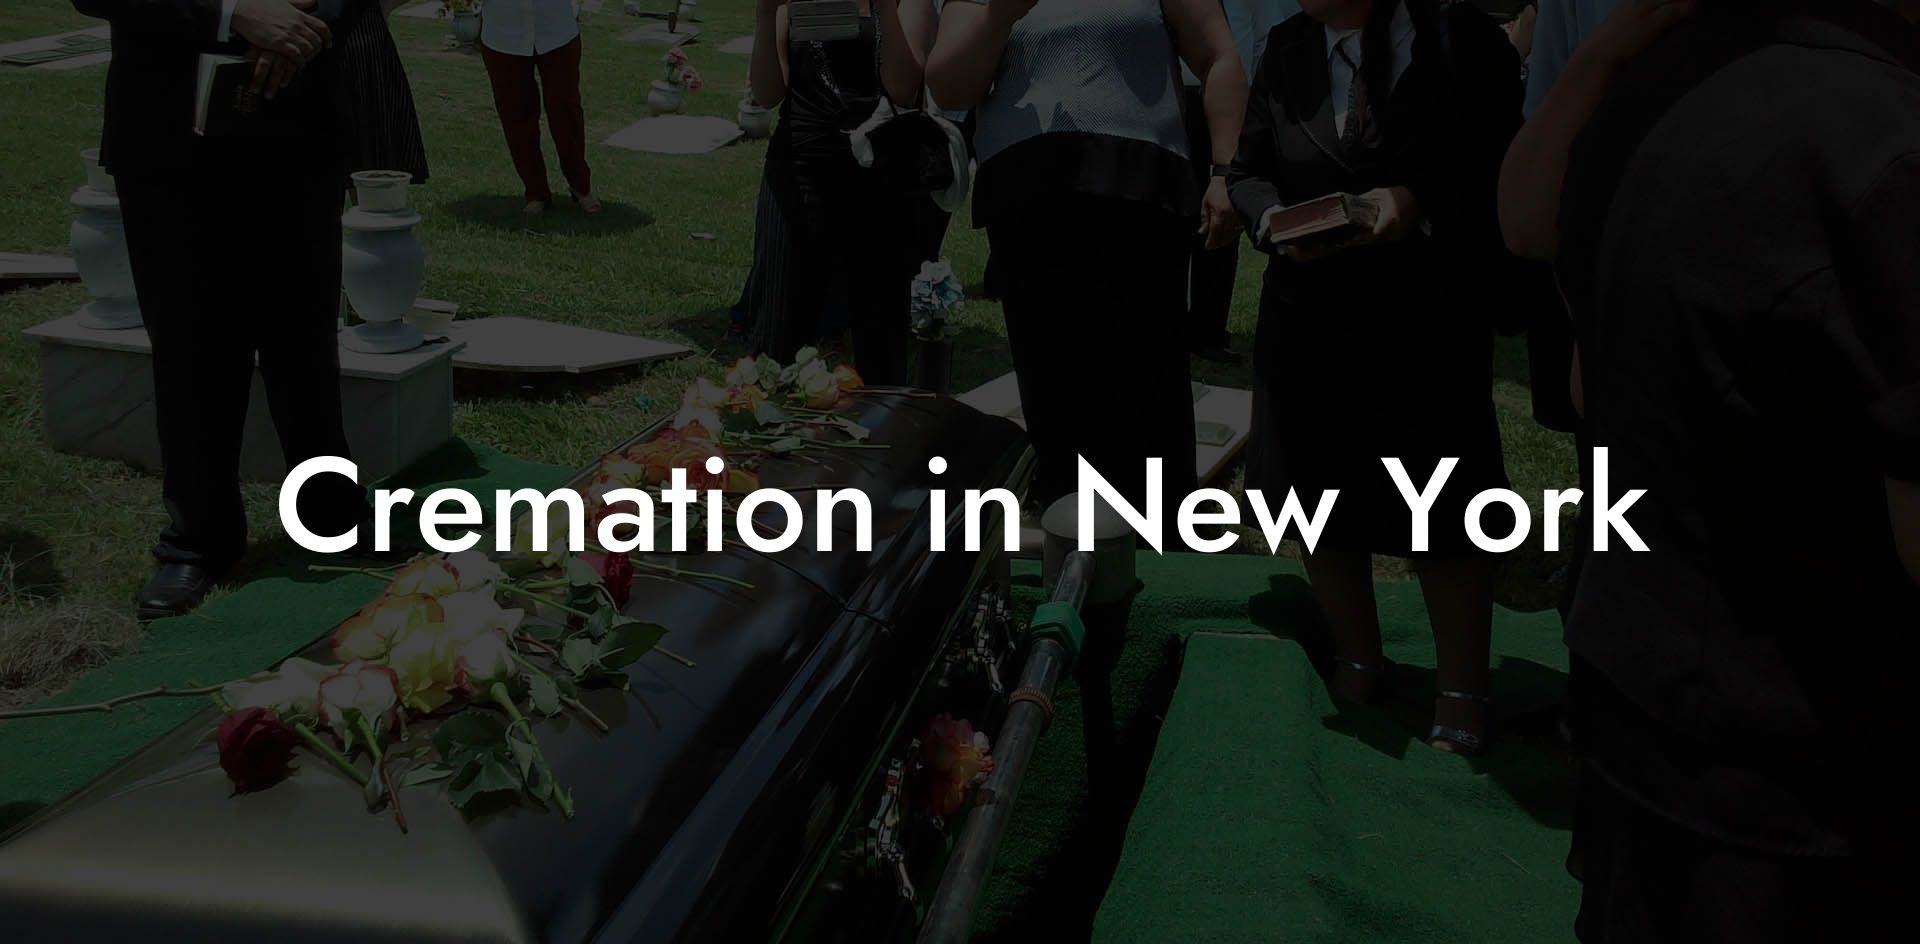 Cremation in New York